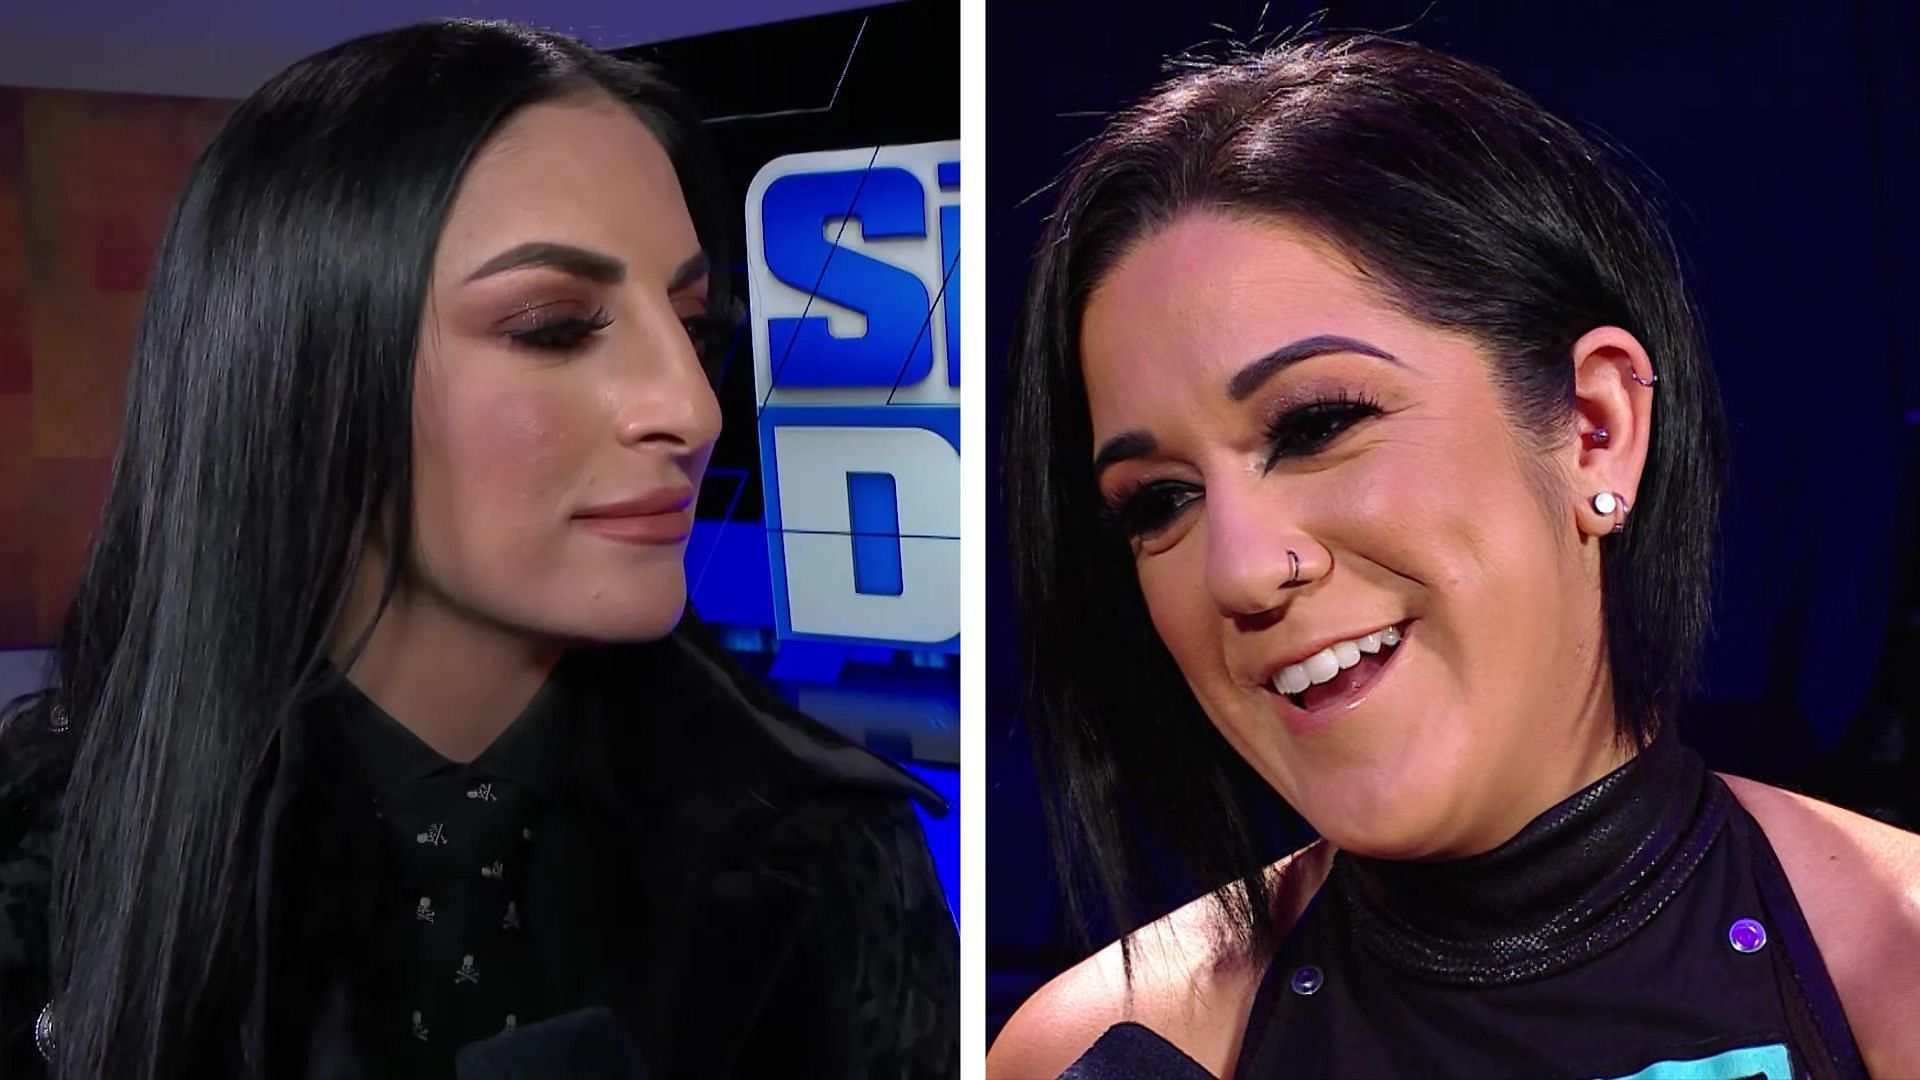 Could Sonya Deville fight Bayley at Hell in a Cell?